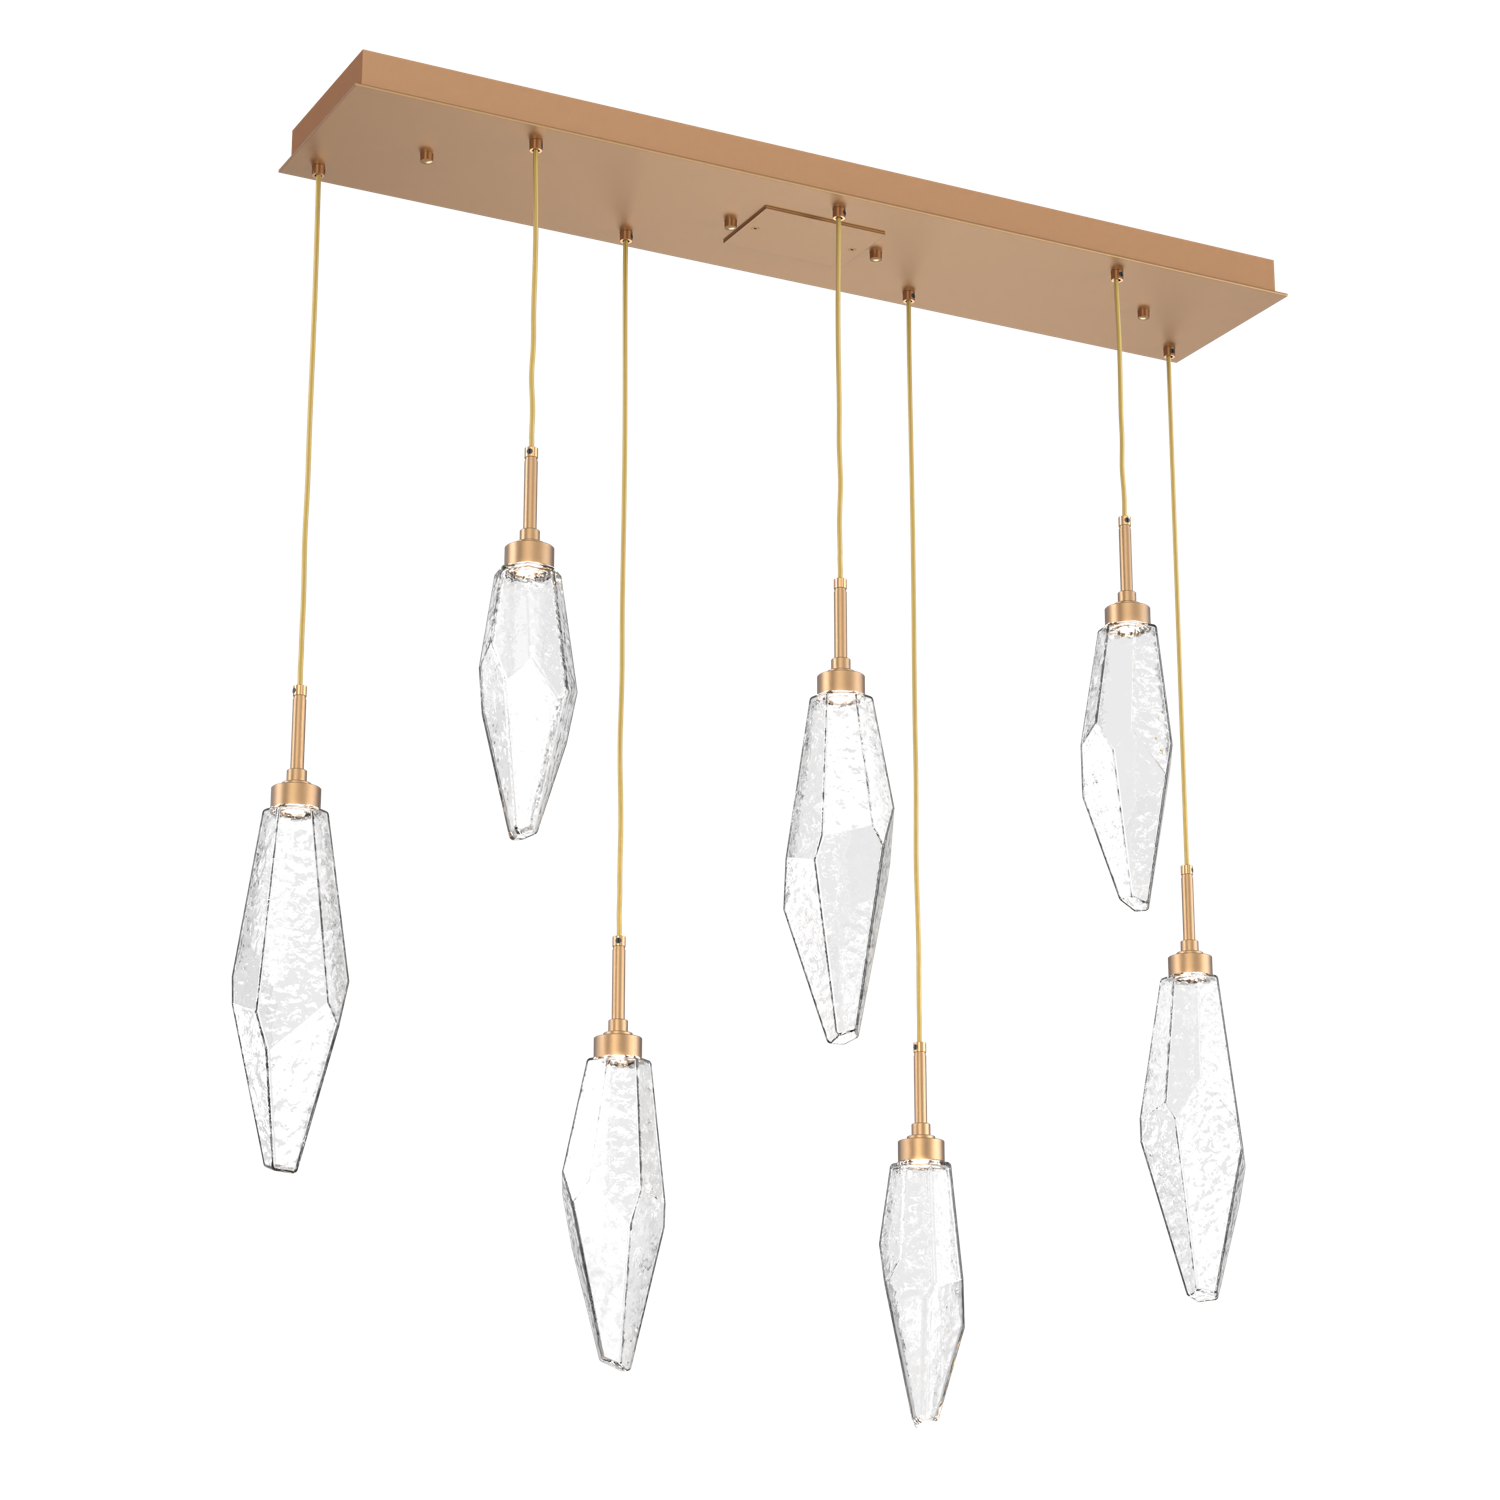 PLB0050-07-NB-CC-Hammerton-Studio-Rock-Crystal-7-light-linear-pendant-chandelier-with-novel-brass-finish-and-clear-glass-shades-and-LED-lamping